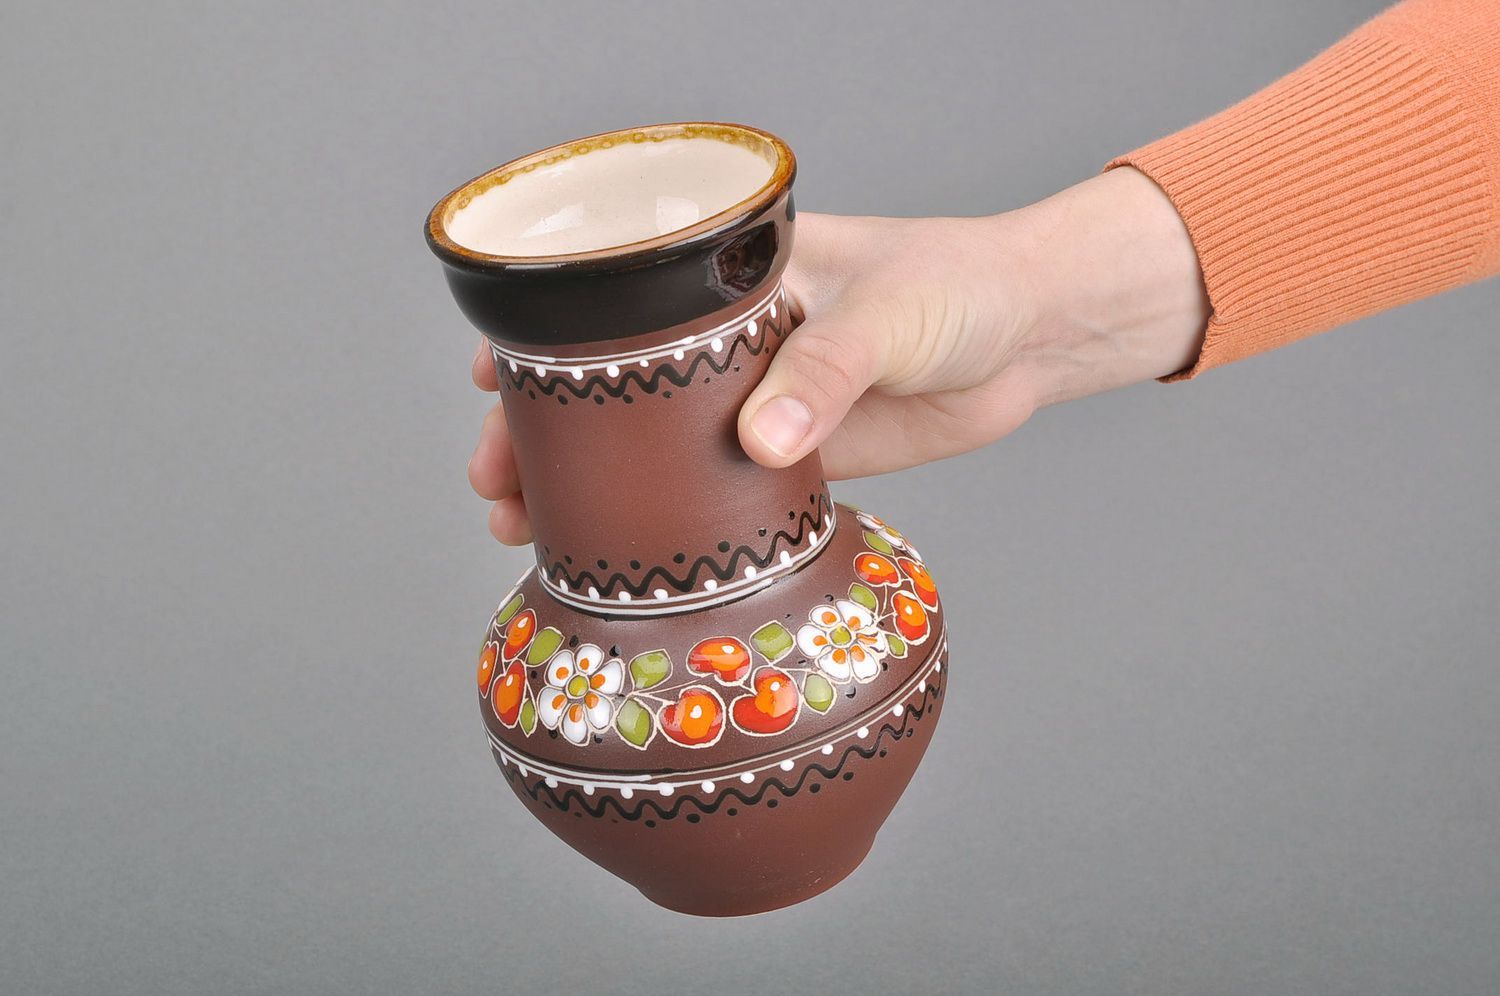 60 oz ceramic milk pitcher jug in brown color with ethnic decoration painting 1,2 lb photo 5